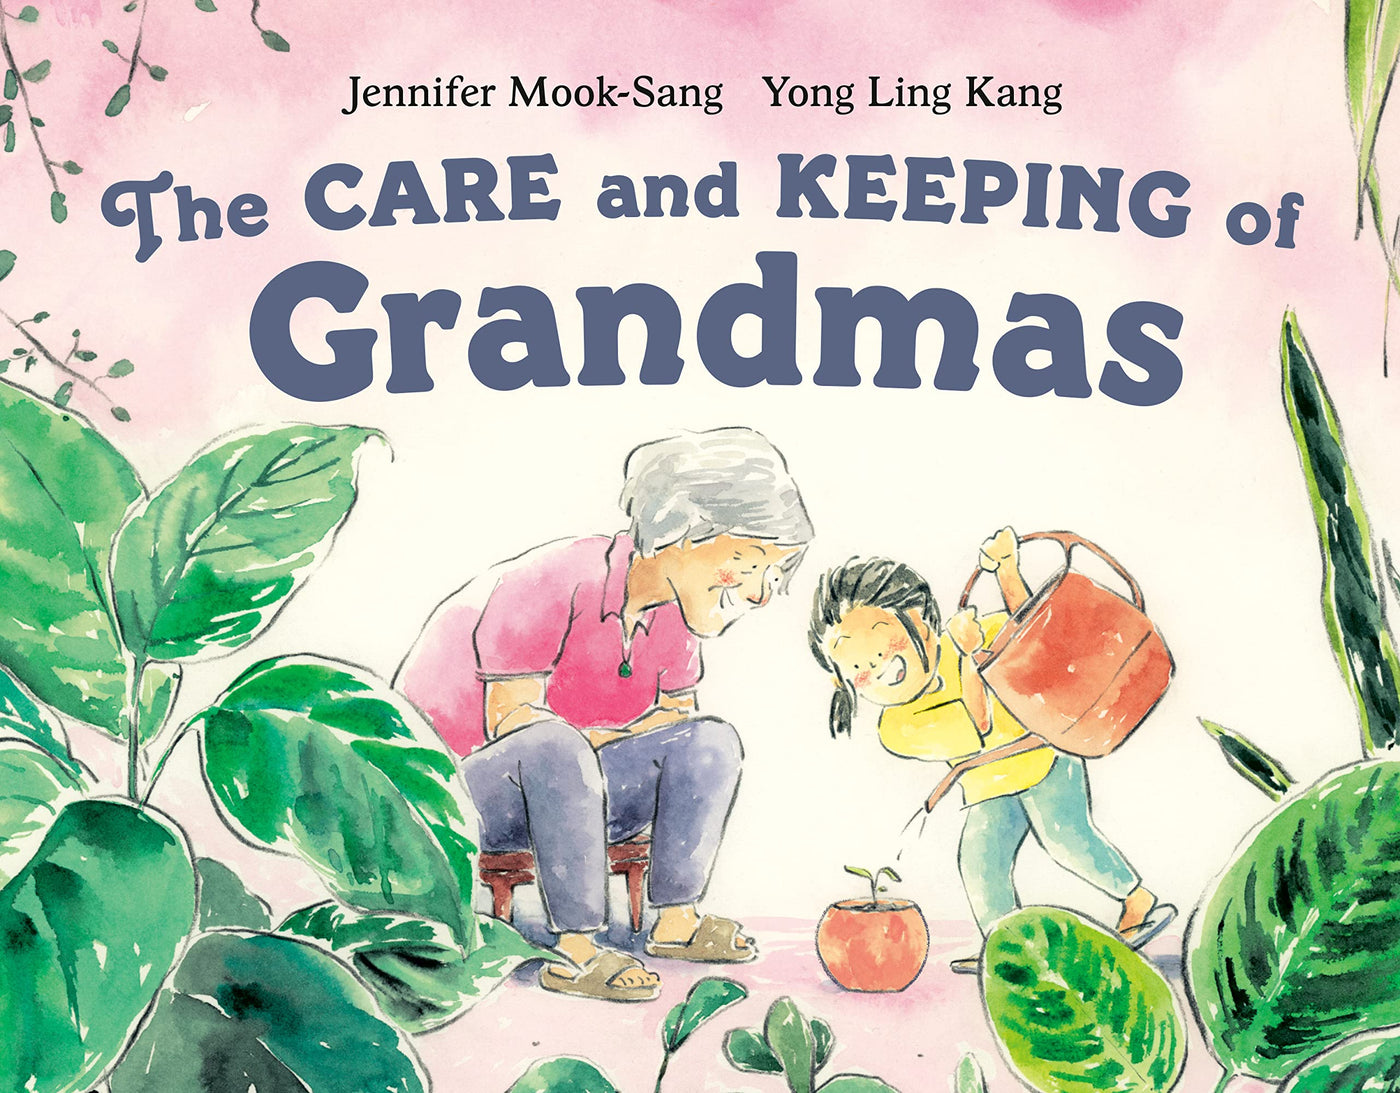 The Care and Keeping of Grandmas